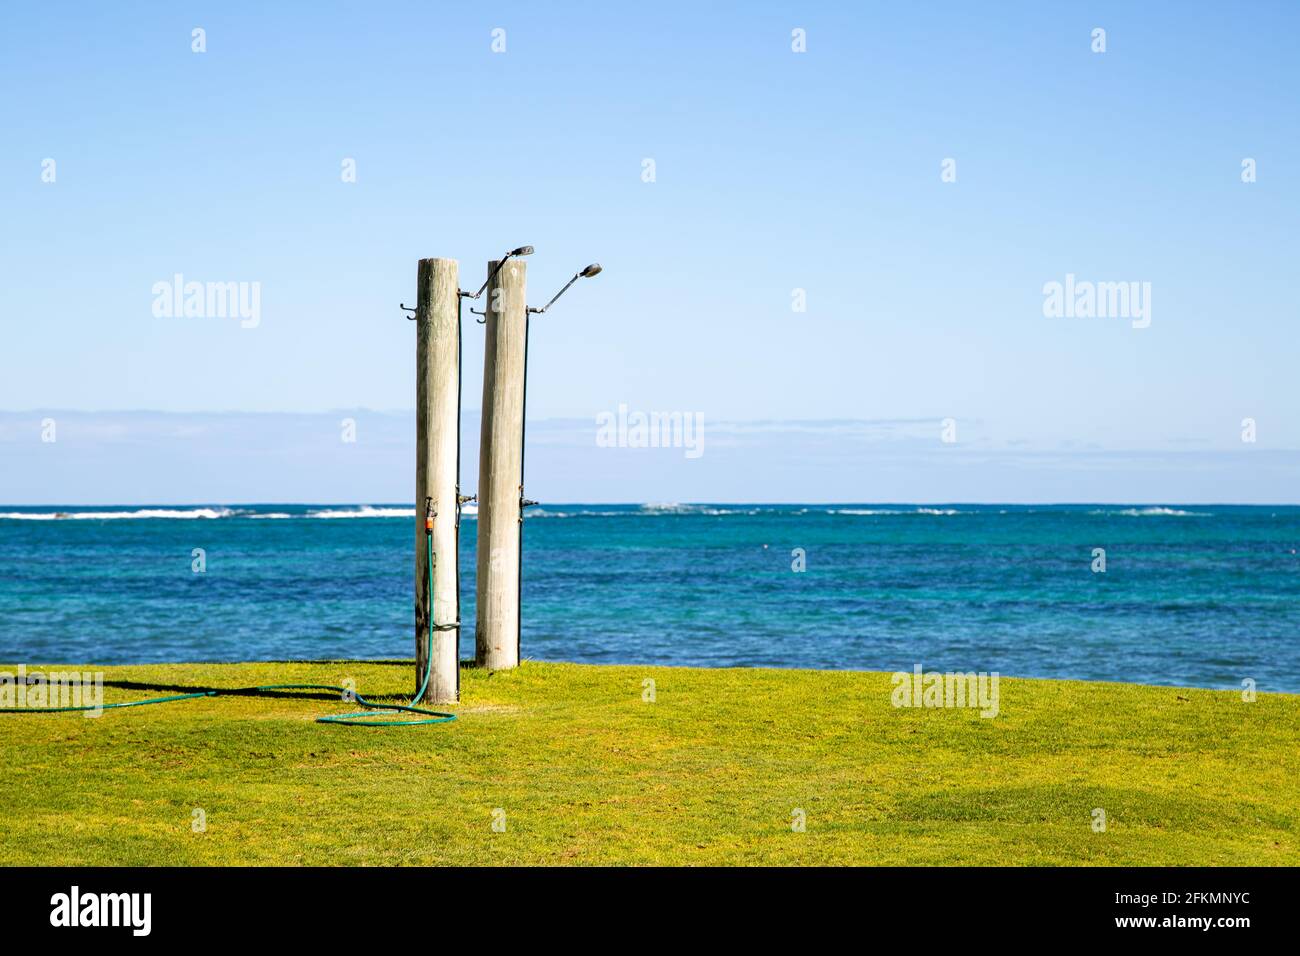 Public outdoor showers by the beach Stock Photo